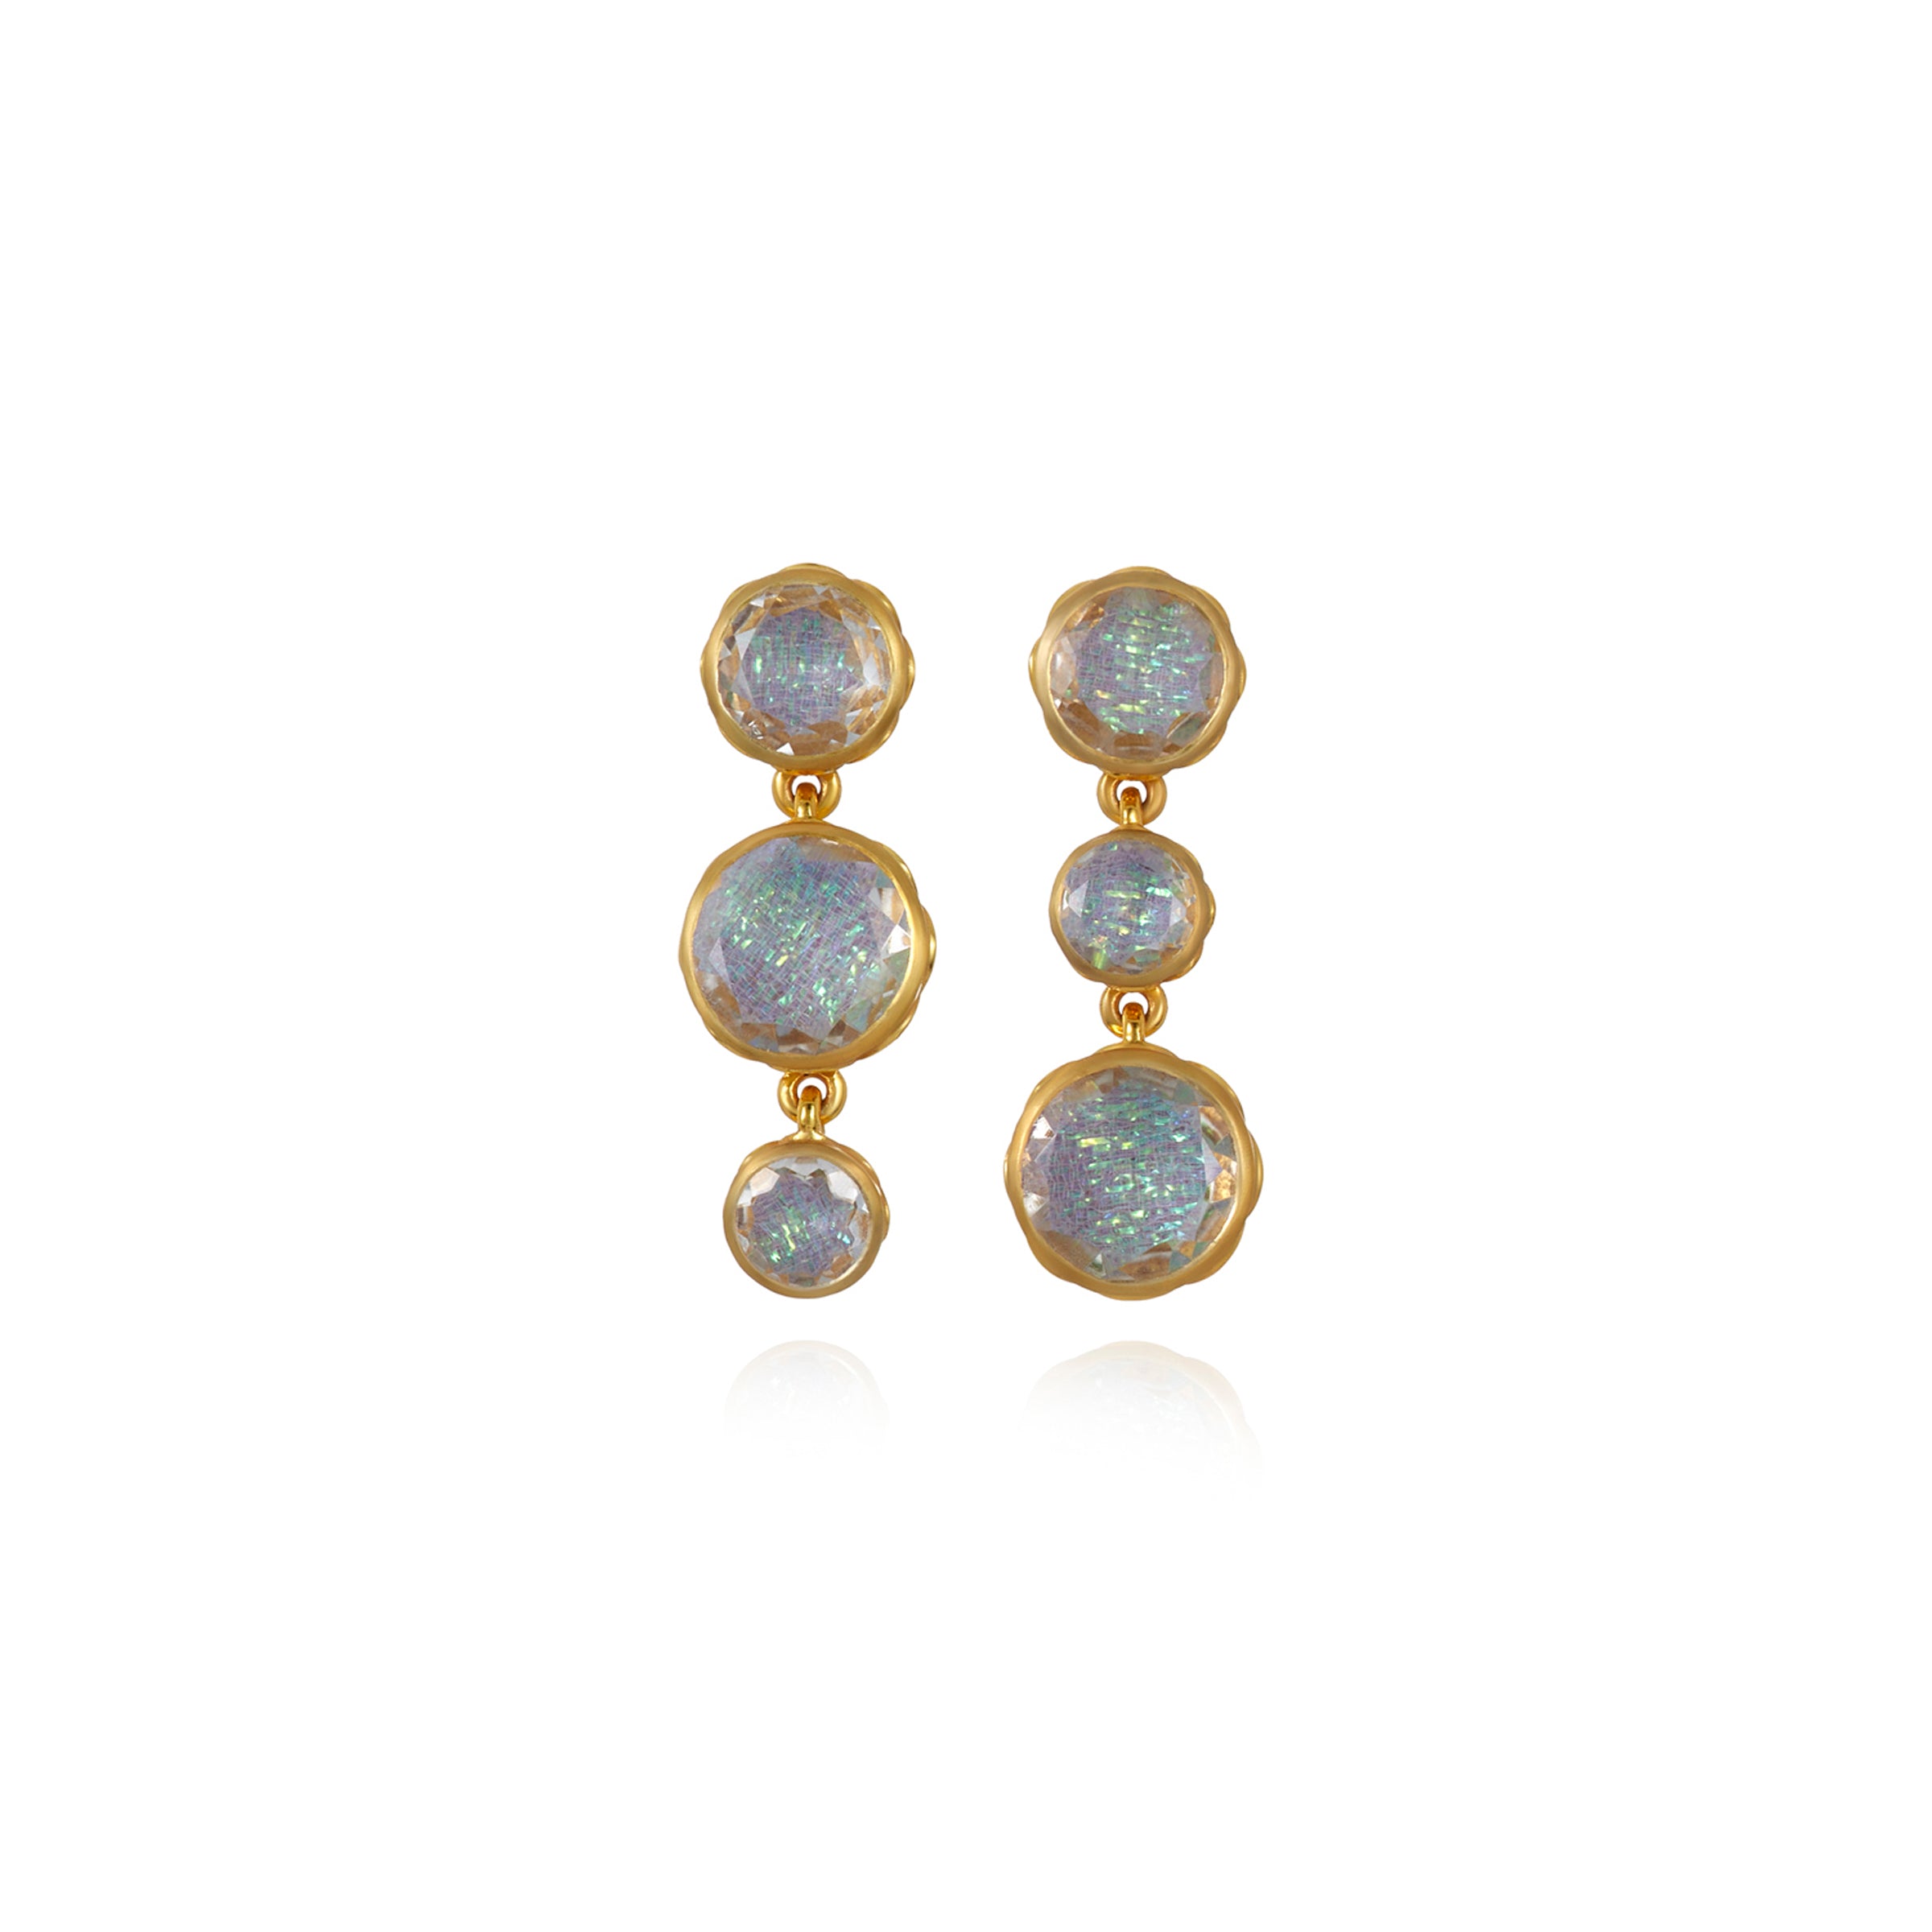 L&H Bride Round 3-Drop Earrings in Bliss (White Rhodium or Yellow Gold Wash)